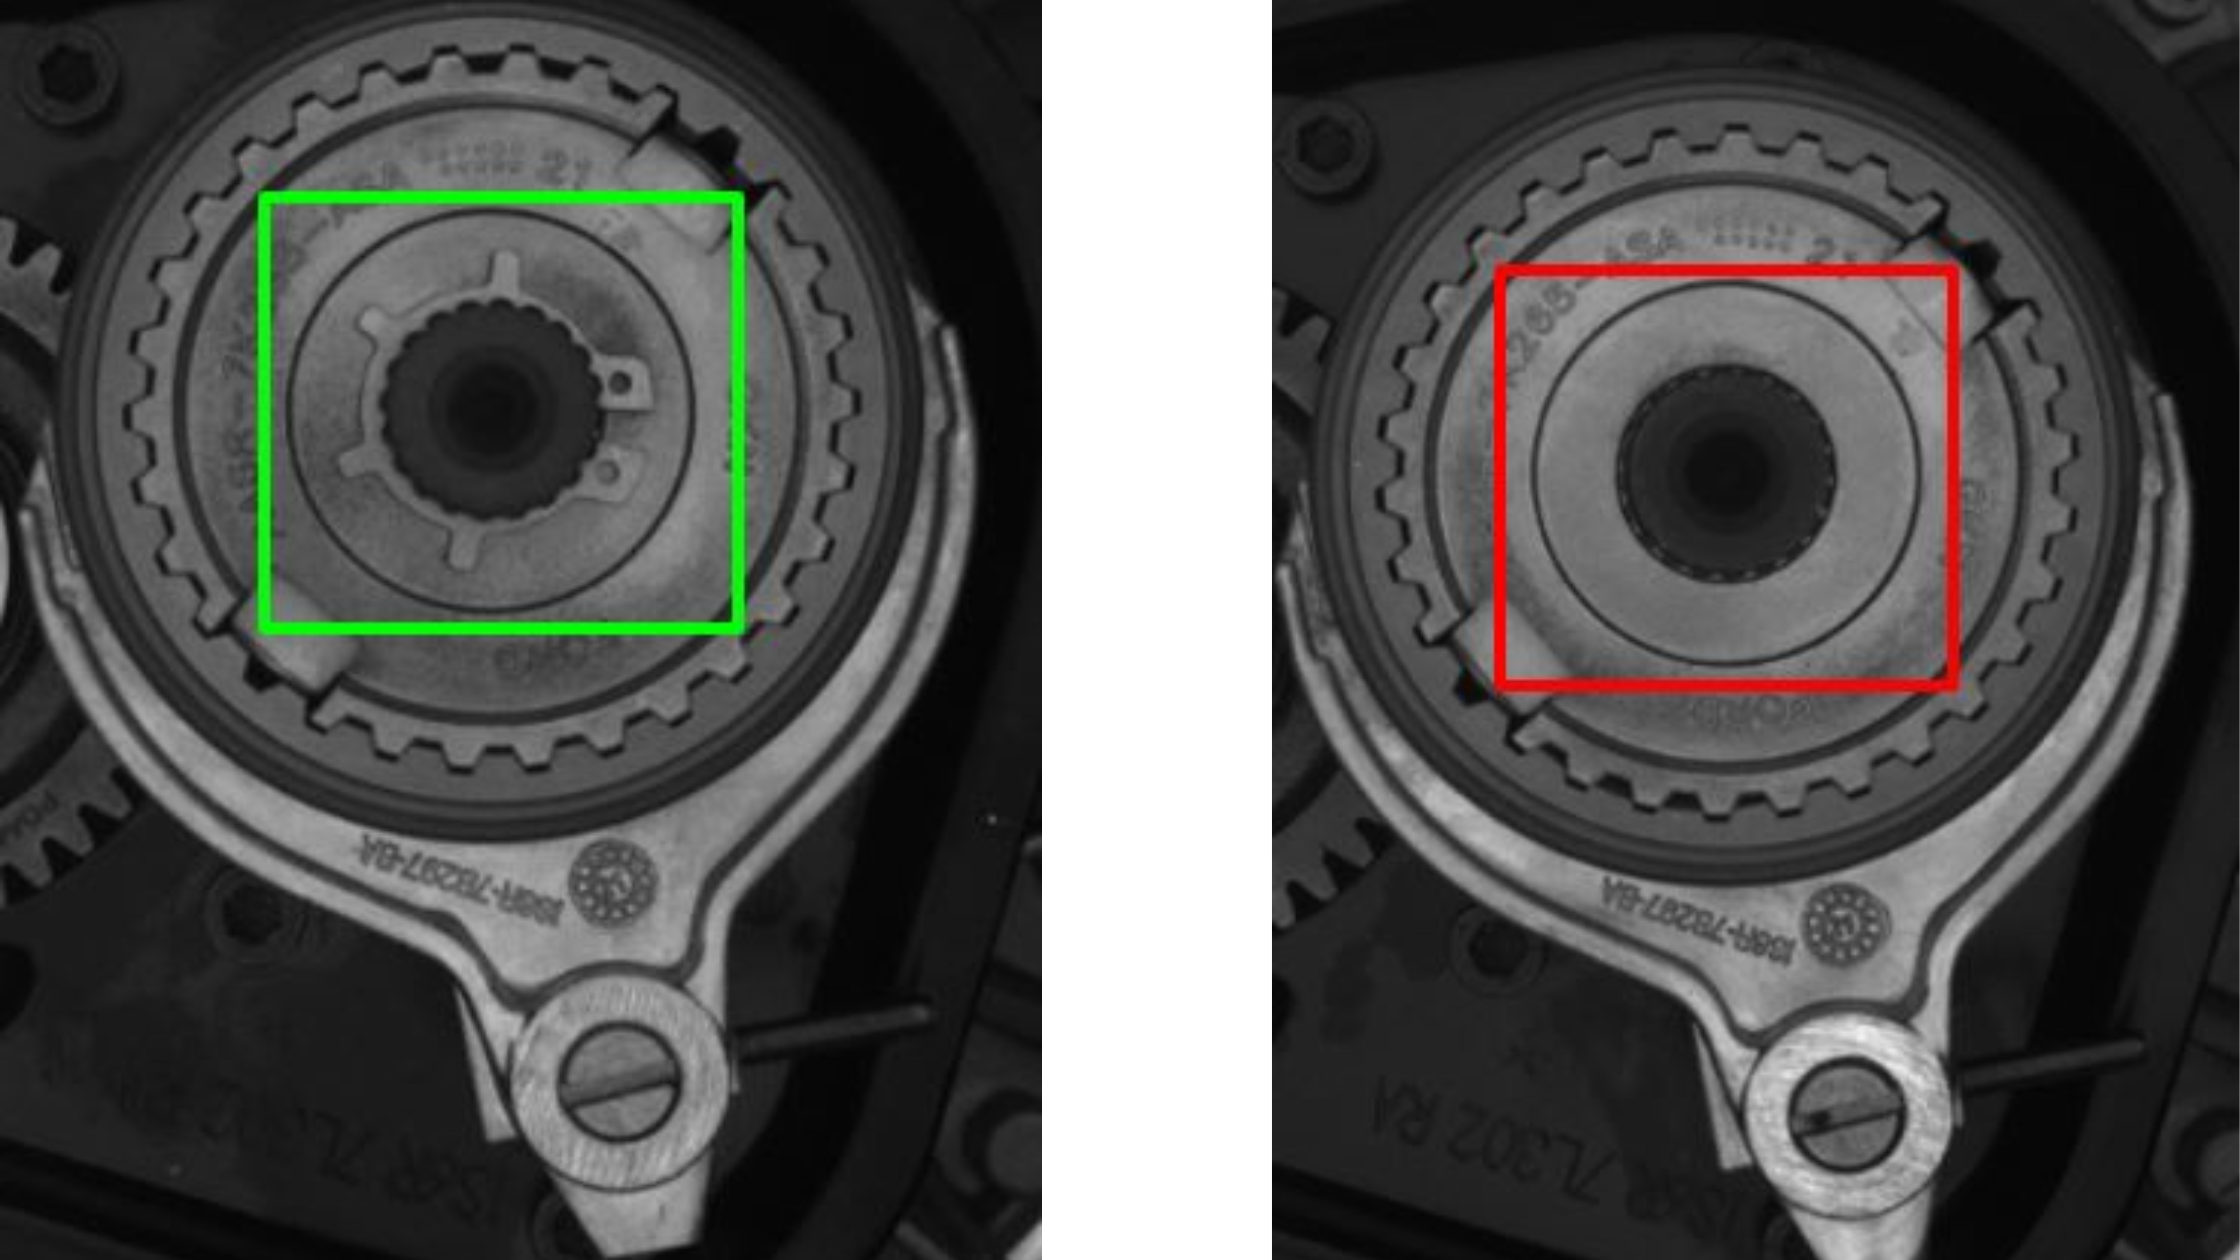 Gearboxes with (good) and without (not good) the round circlip